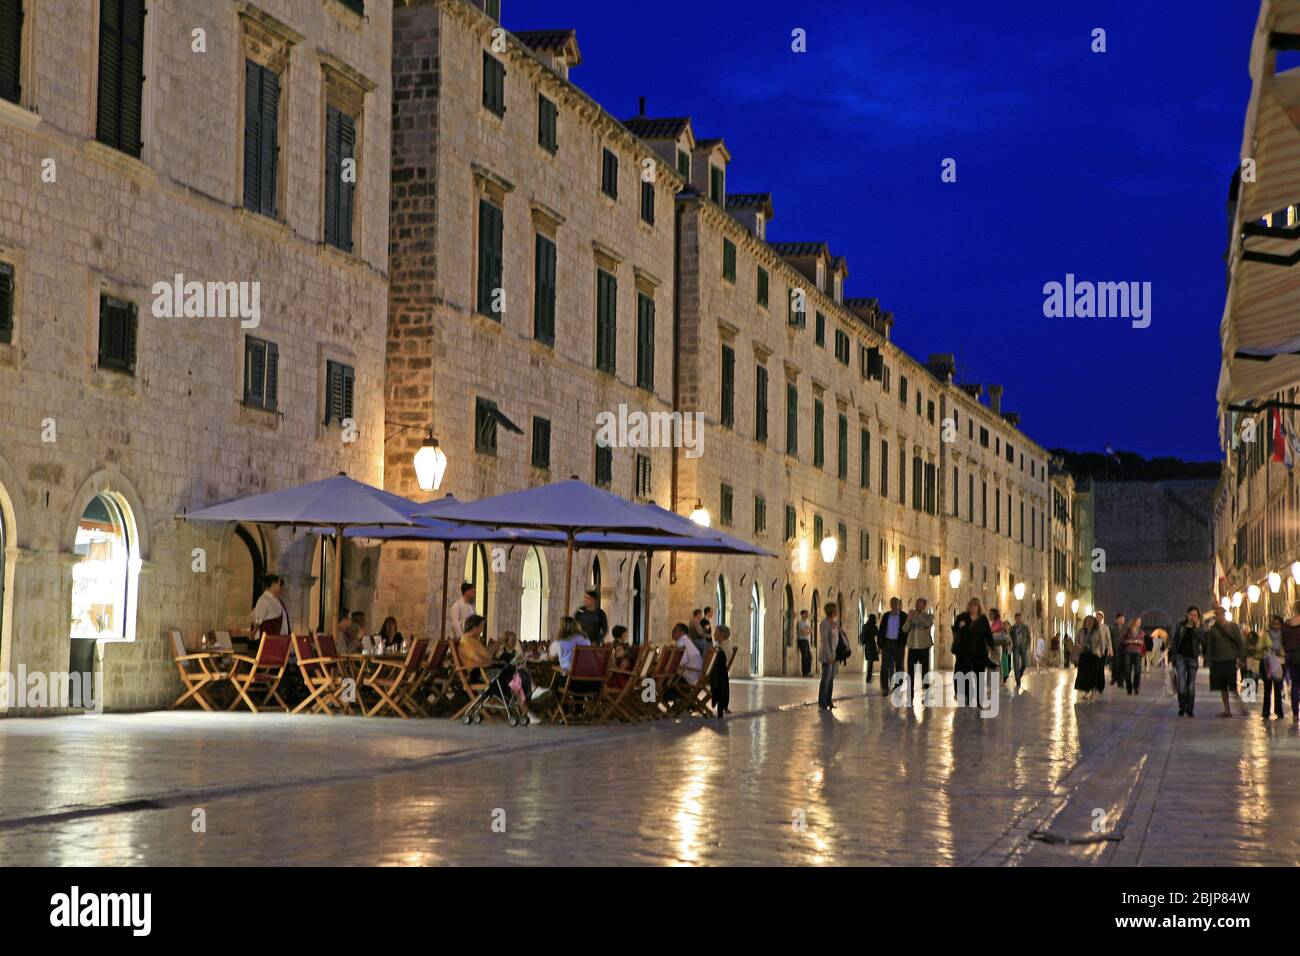 In the evening, the lights turn on in the towers, walls, streets, alleys, shops and sights of Dubrovnik Stock Photo